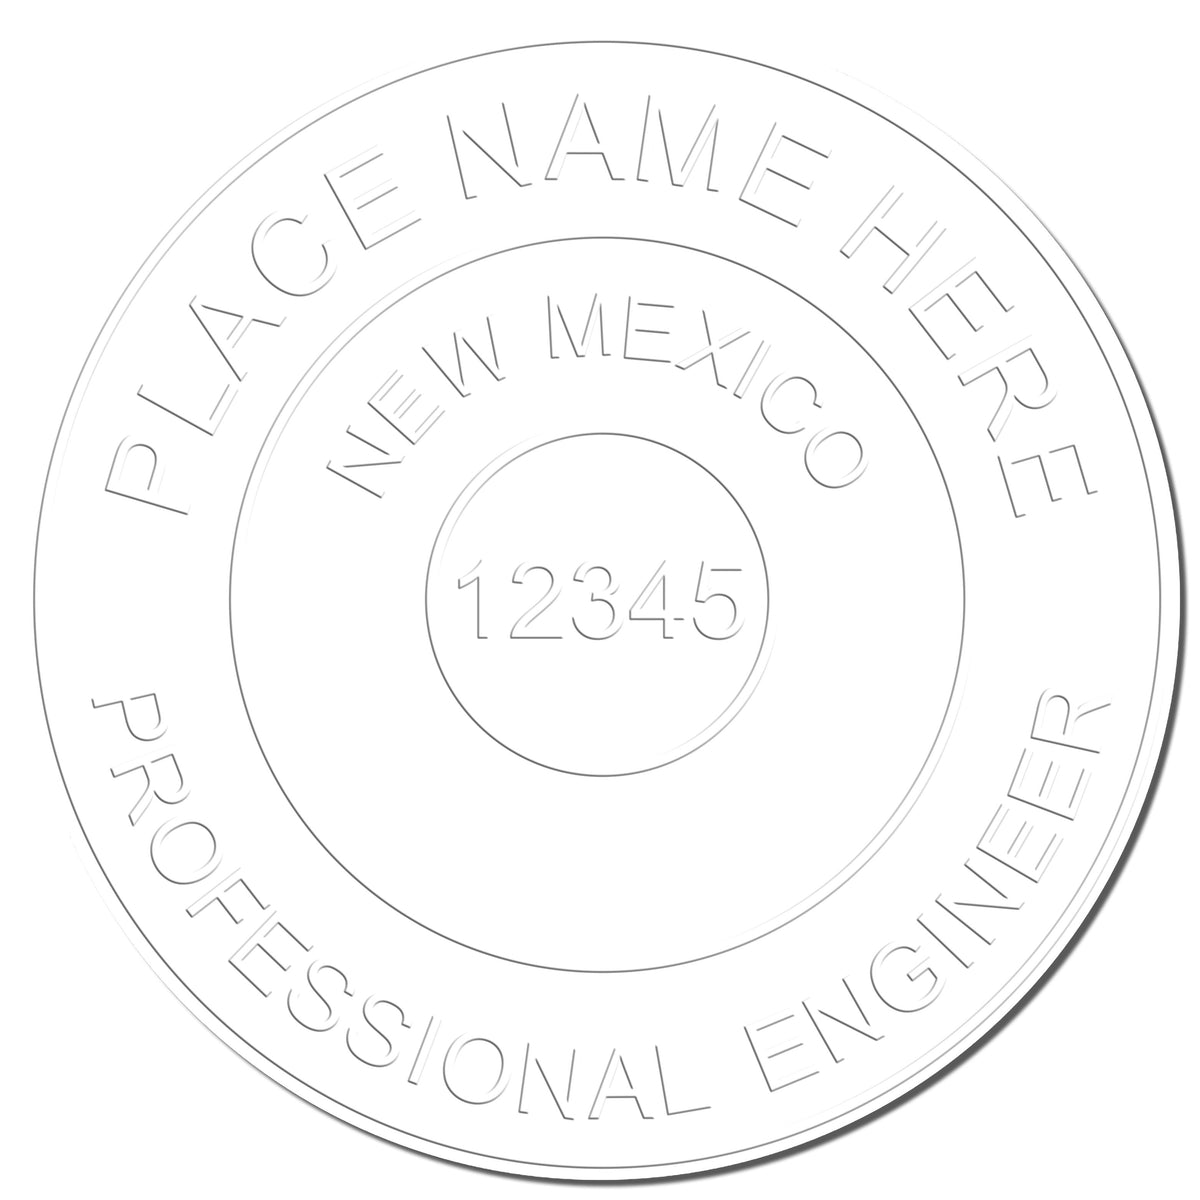 This paper is stamped with a sample imprint of the Hybrid New Mexico Engineer Seal, signifying its quality and reliability.